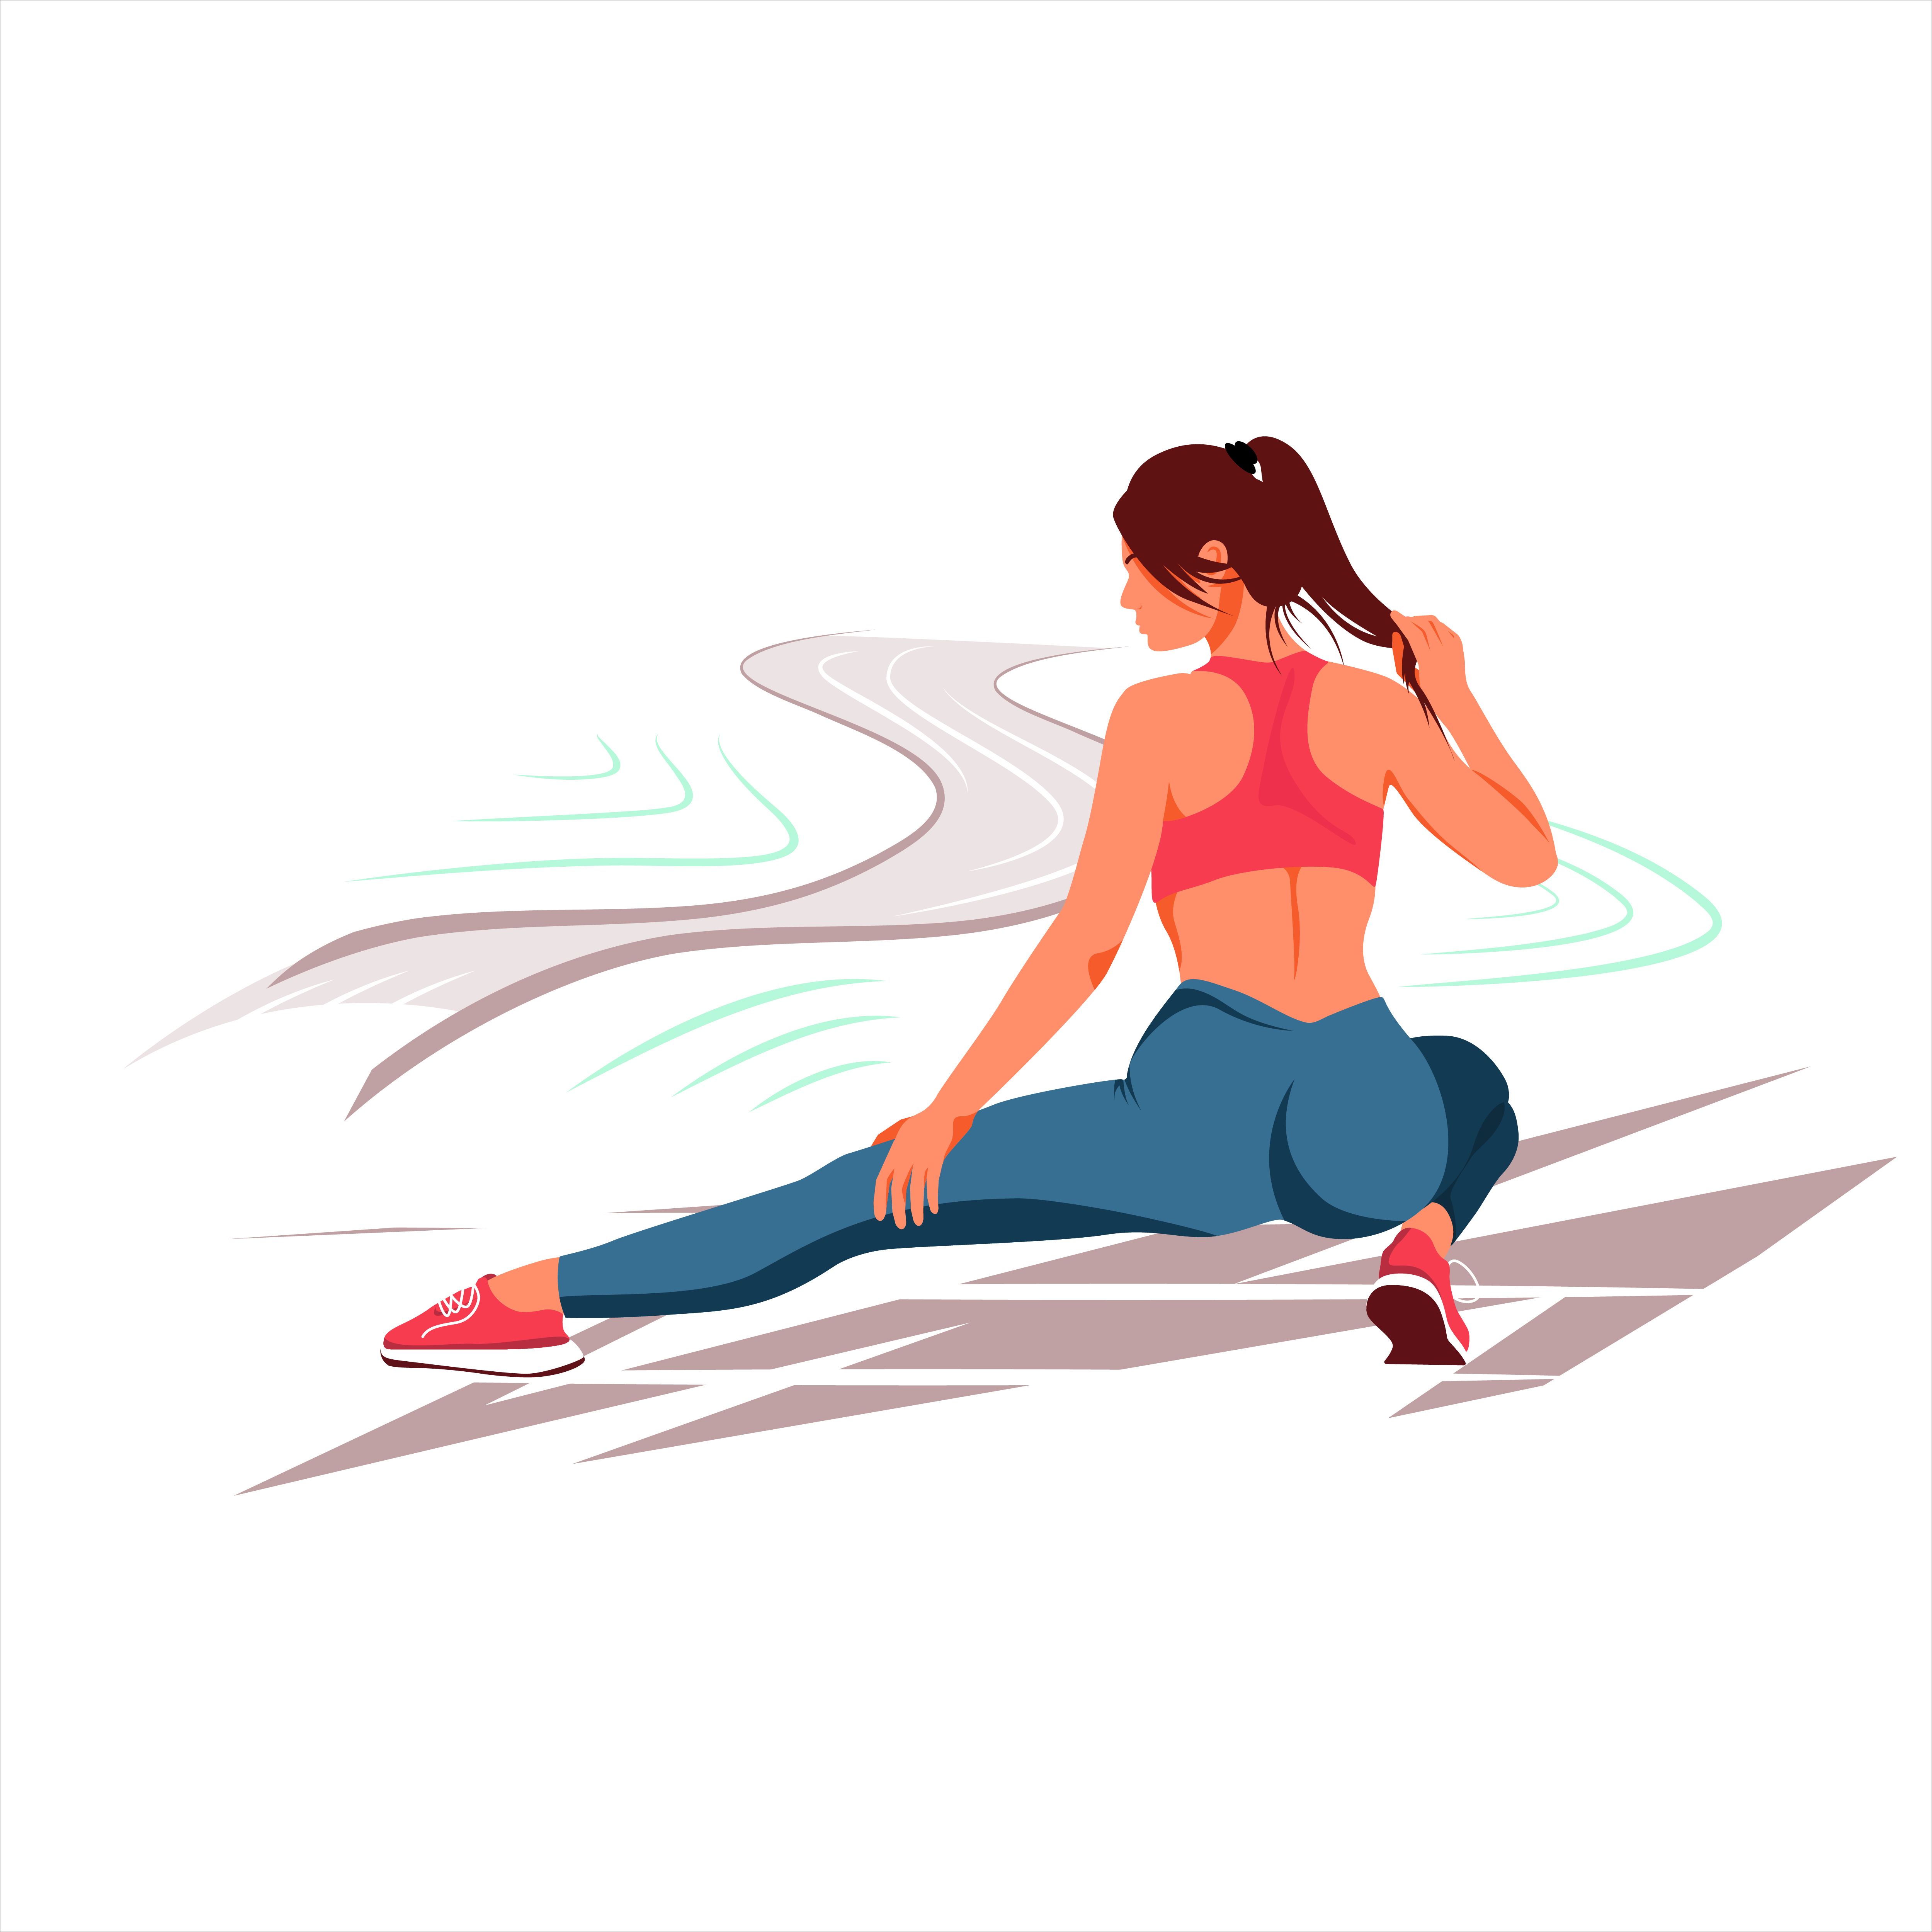 Flat Illustration On A White Background. Girl Does A Warm Up On A Treadmill. Girls Cartoon Art, Gym Art, Illustration